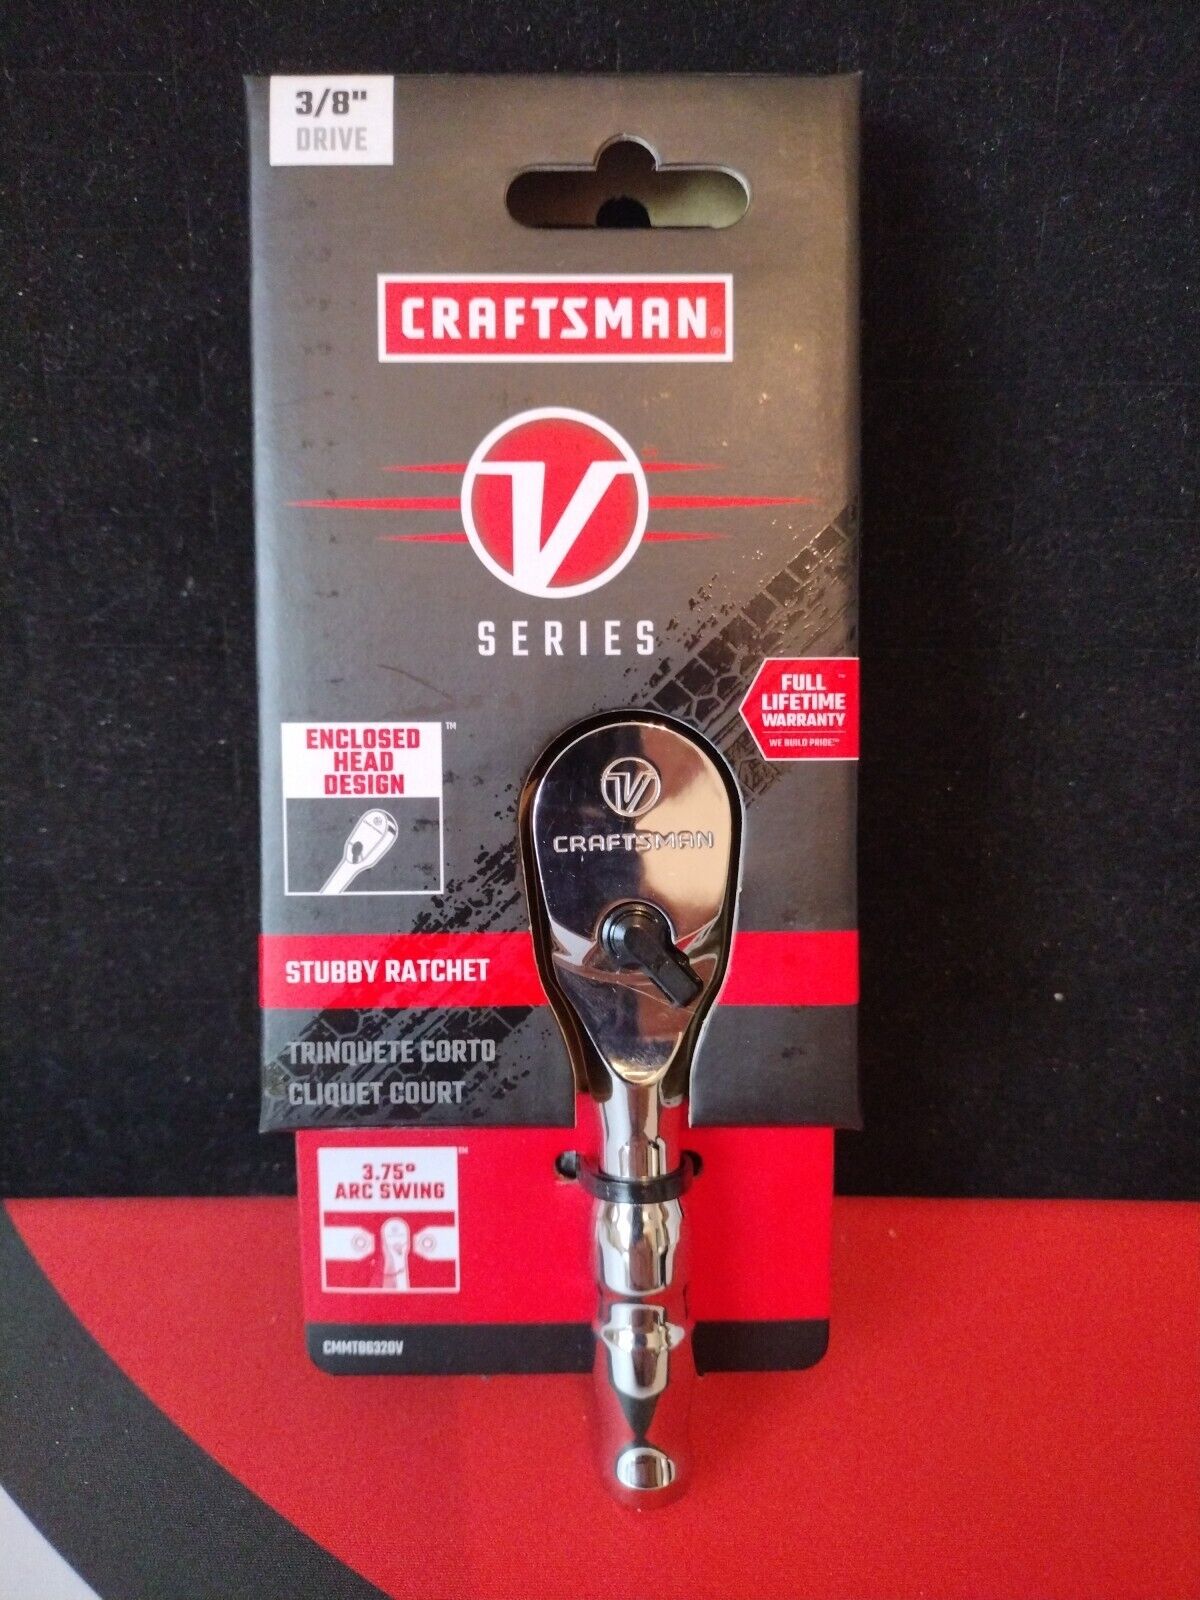 CRAFTSMAN V-SERIES Ratchet, 3/8 Inch Drive, 96-Tooth, Stubby (CMMT86320V) New